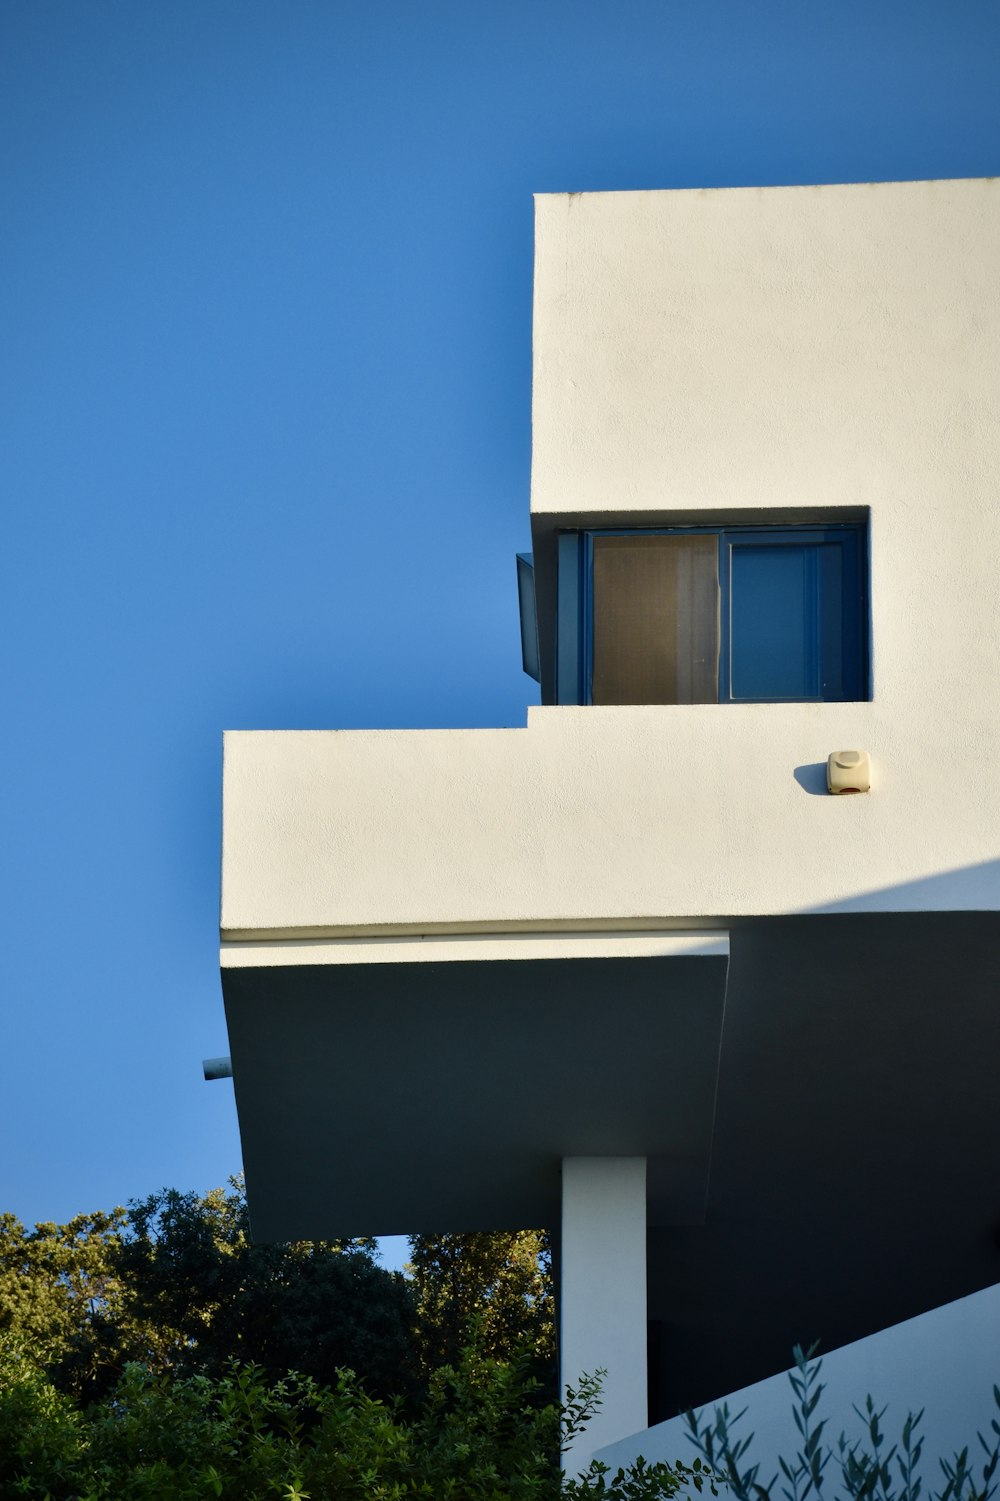 white concrete building with blue window